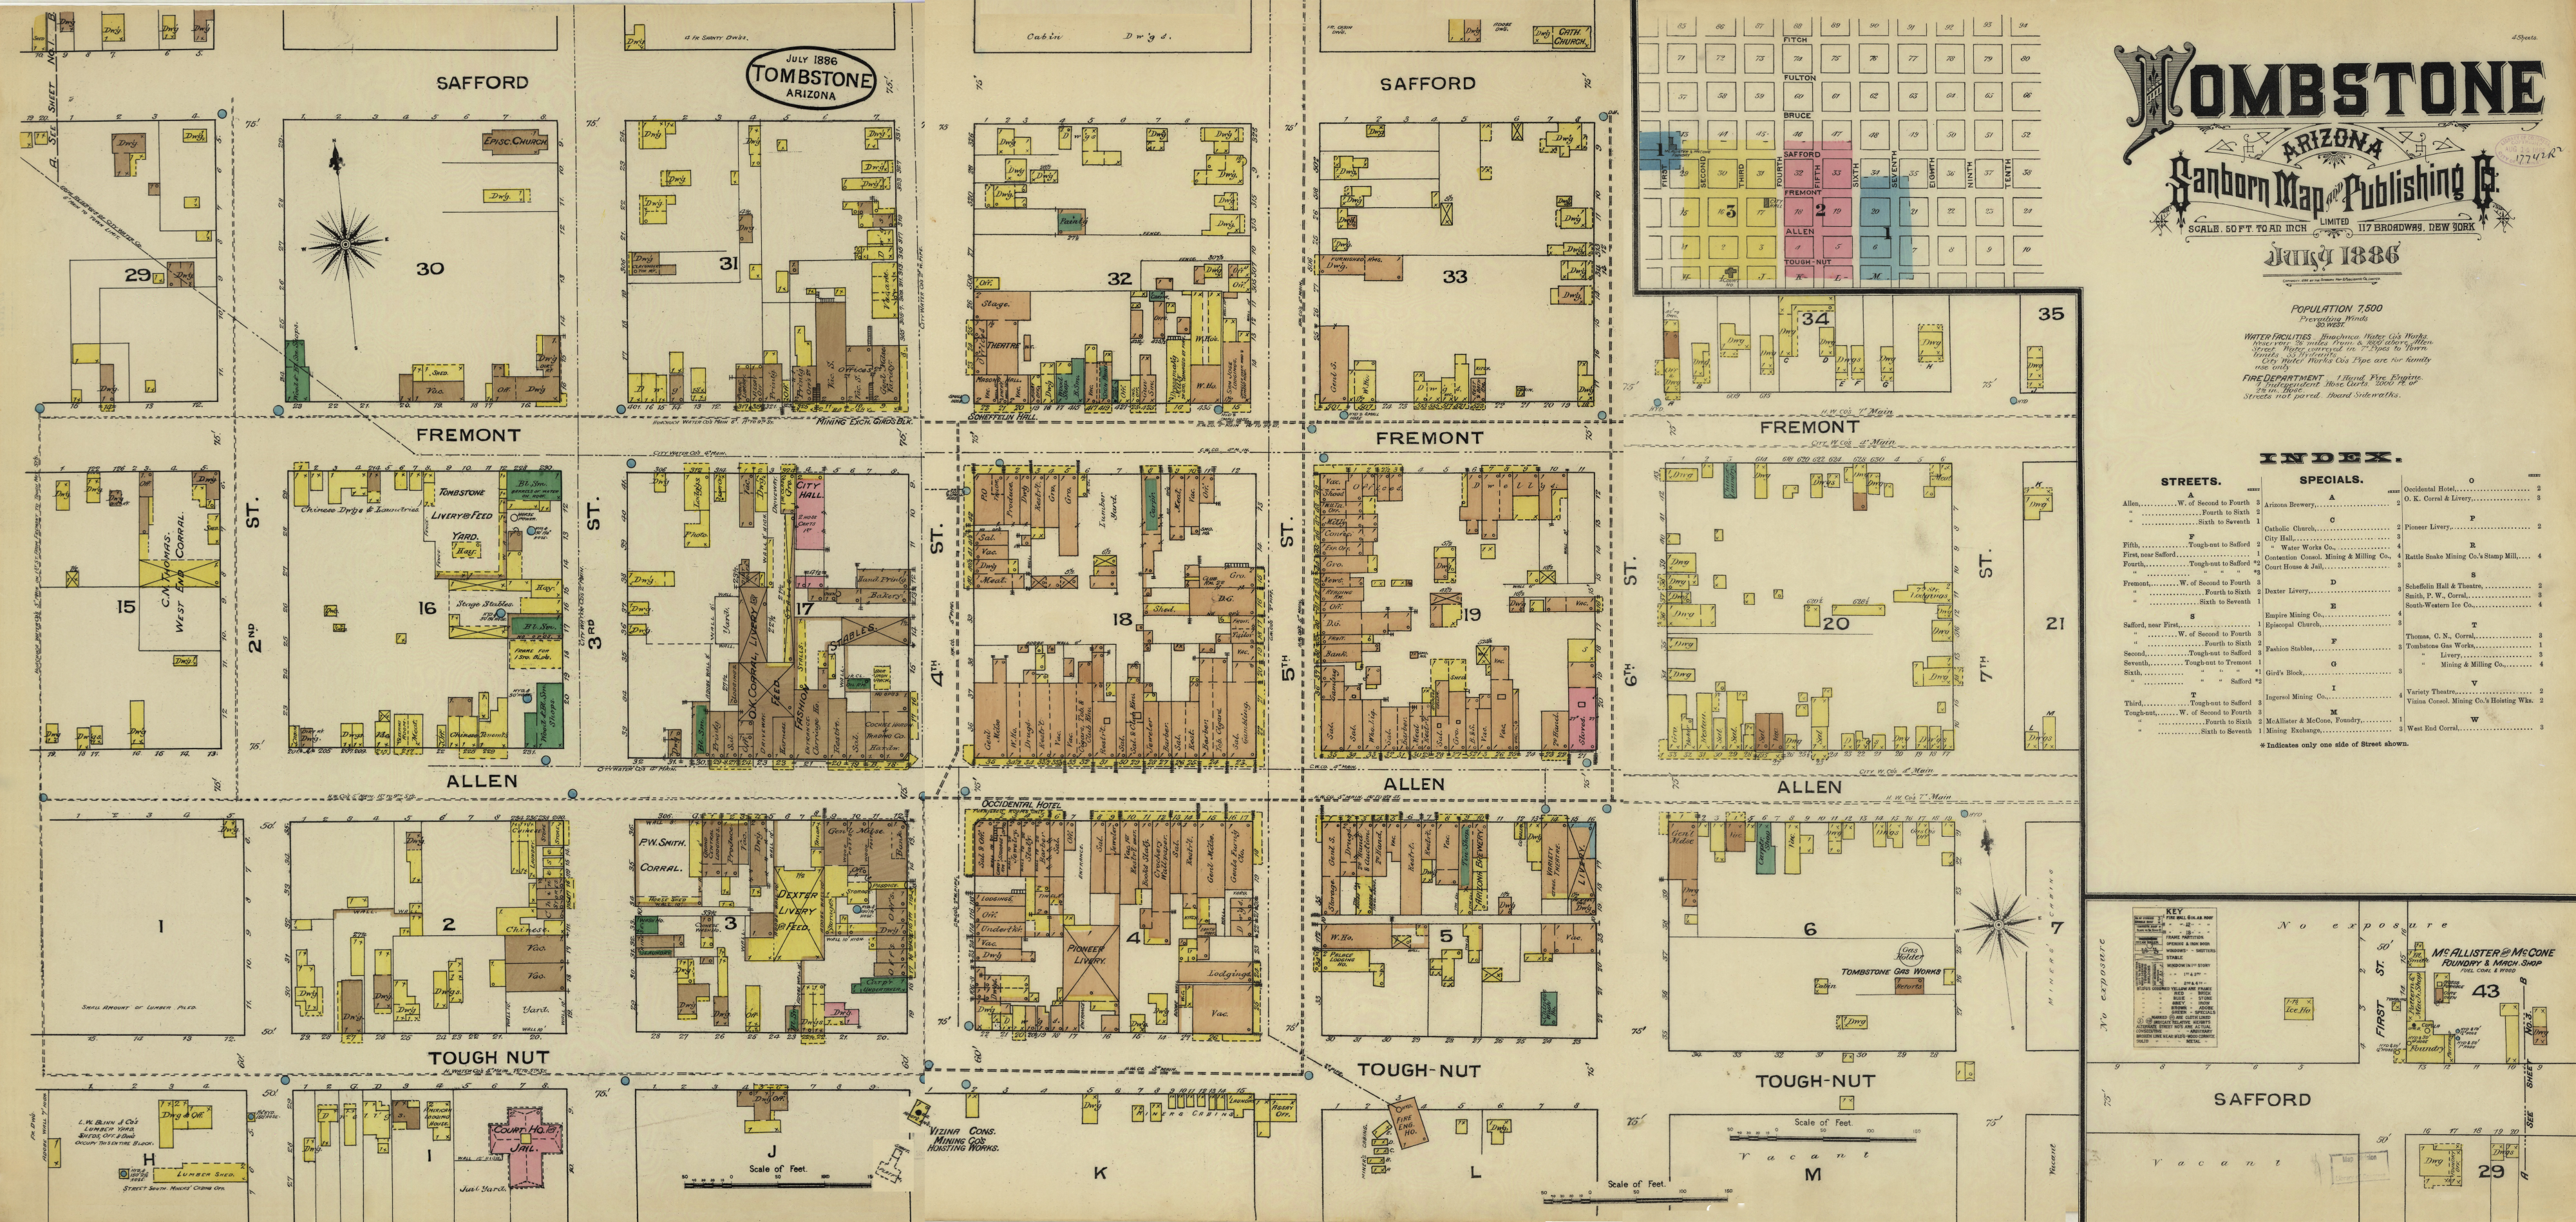 Tombstone fire insurance map 1886_02.png